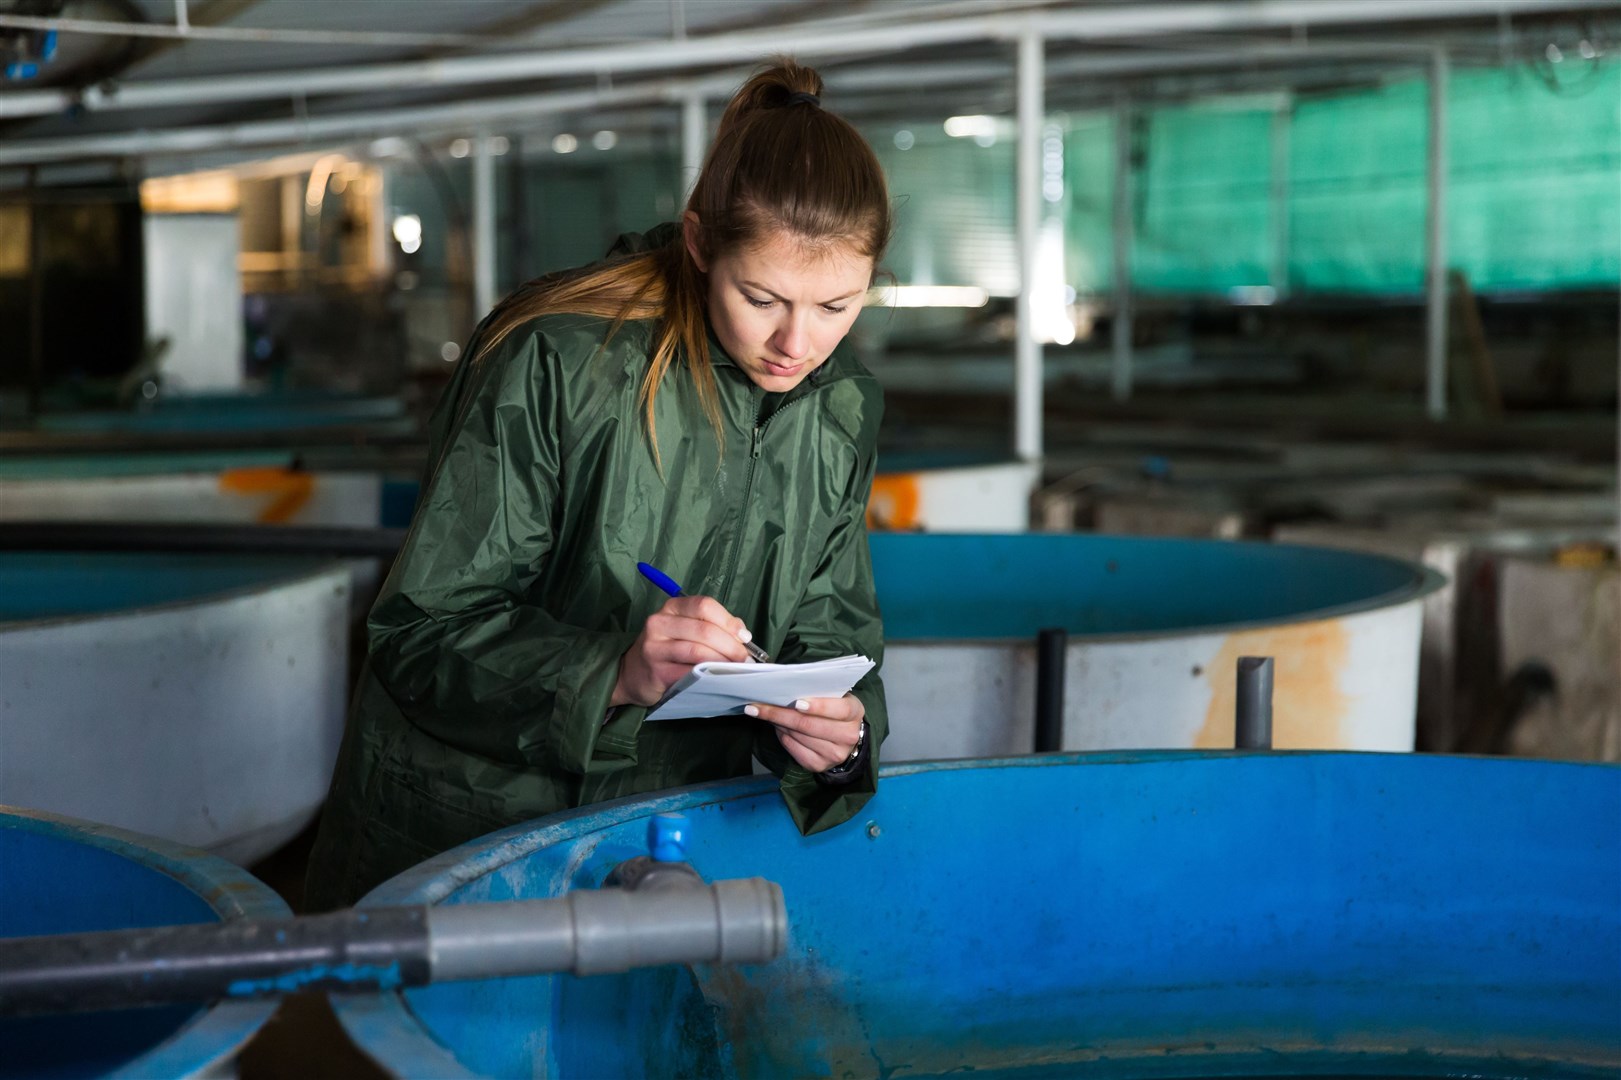 The programme welcomes women who may have no prior experience in the aquaculture sector.